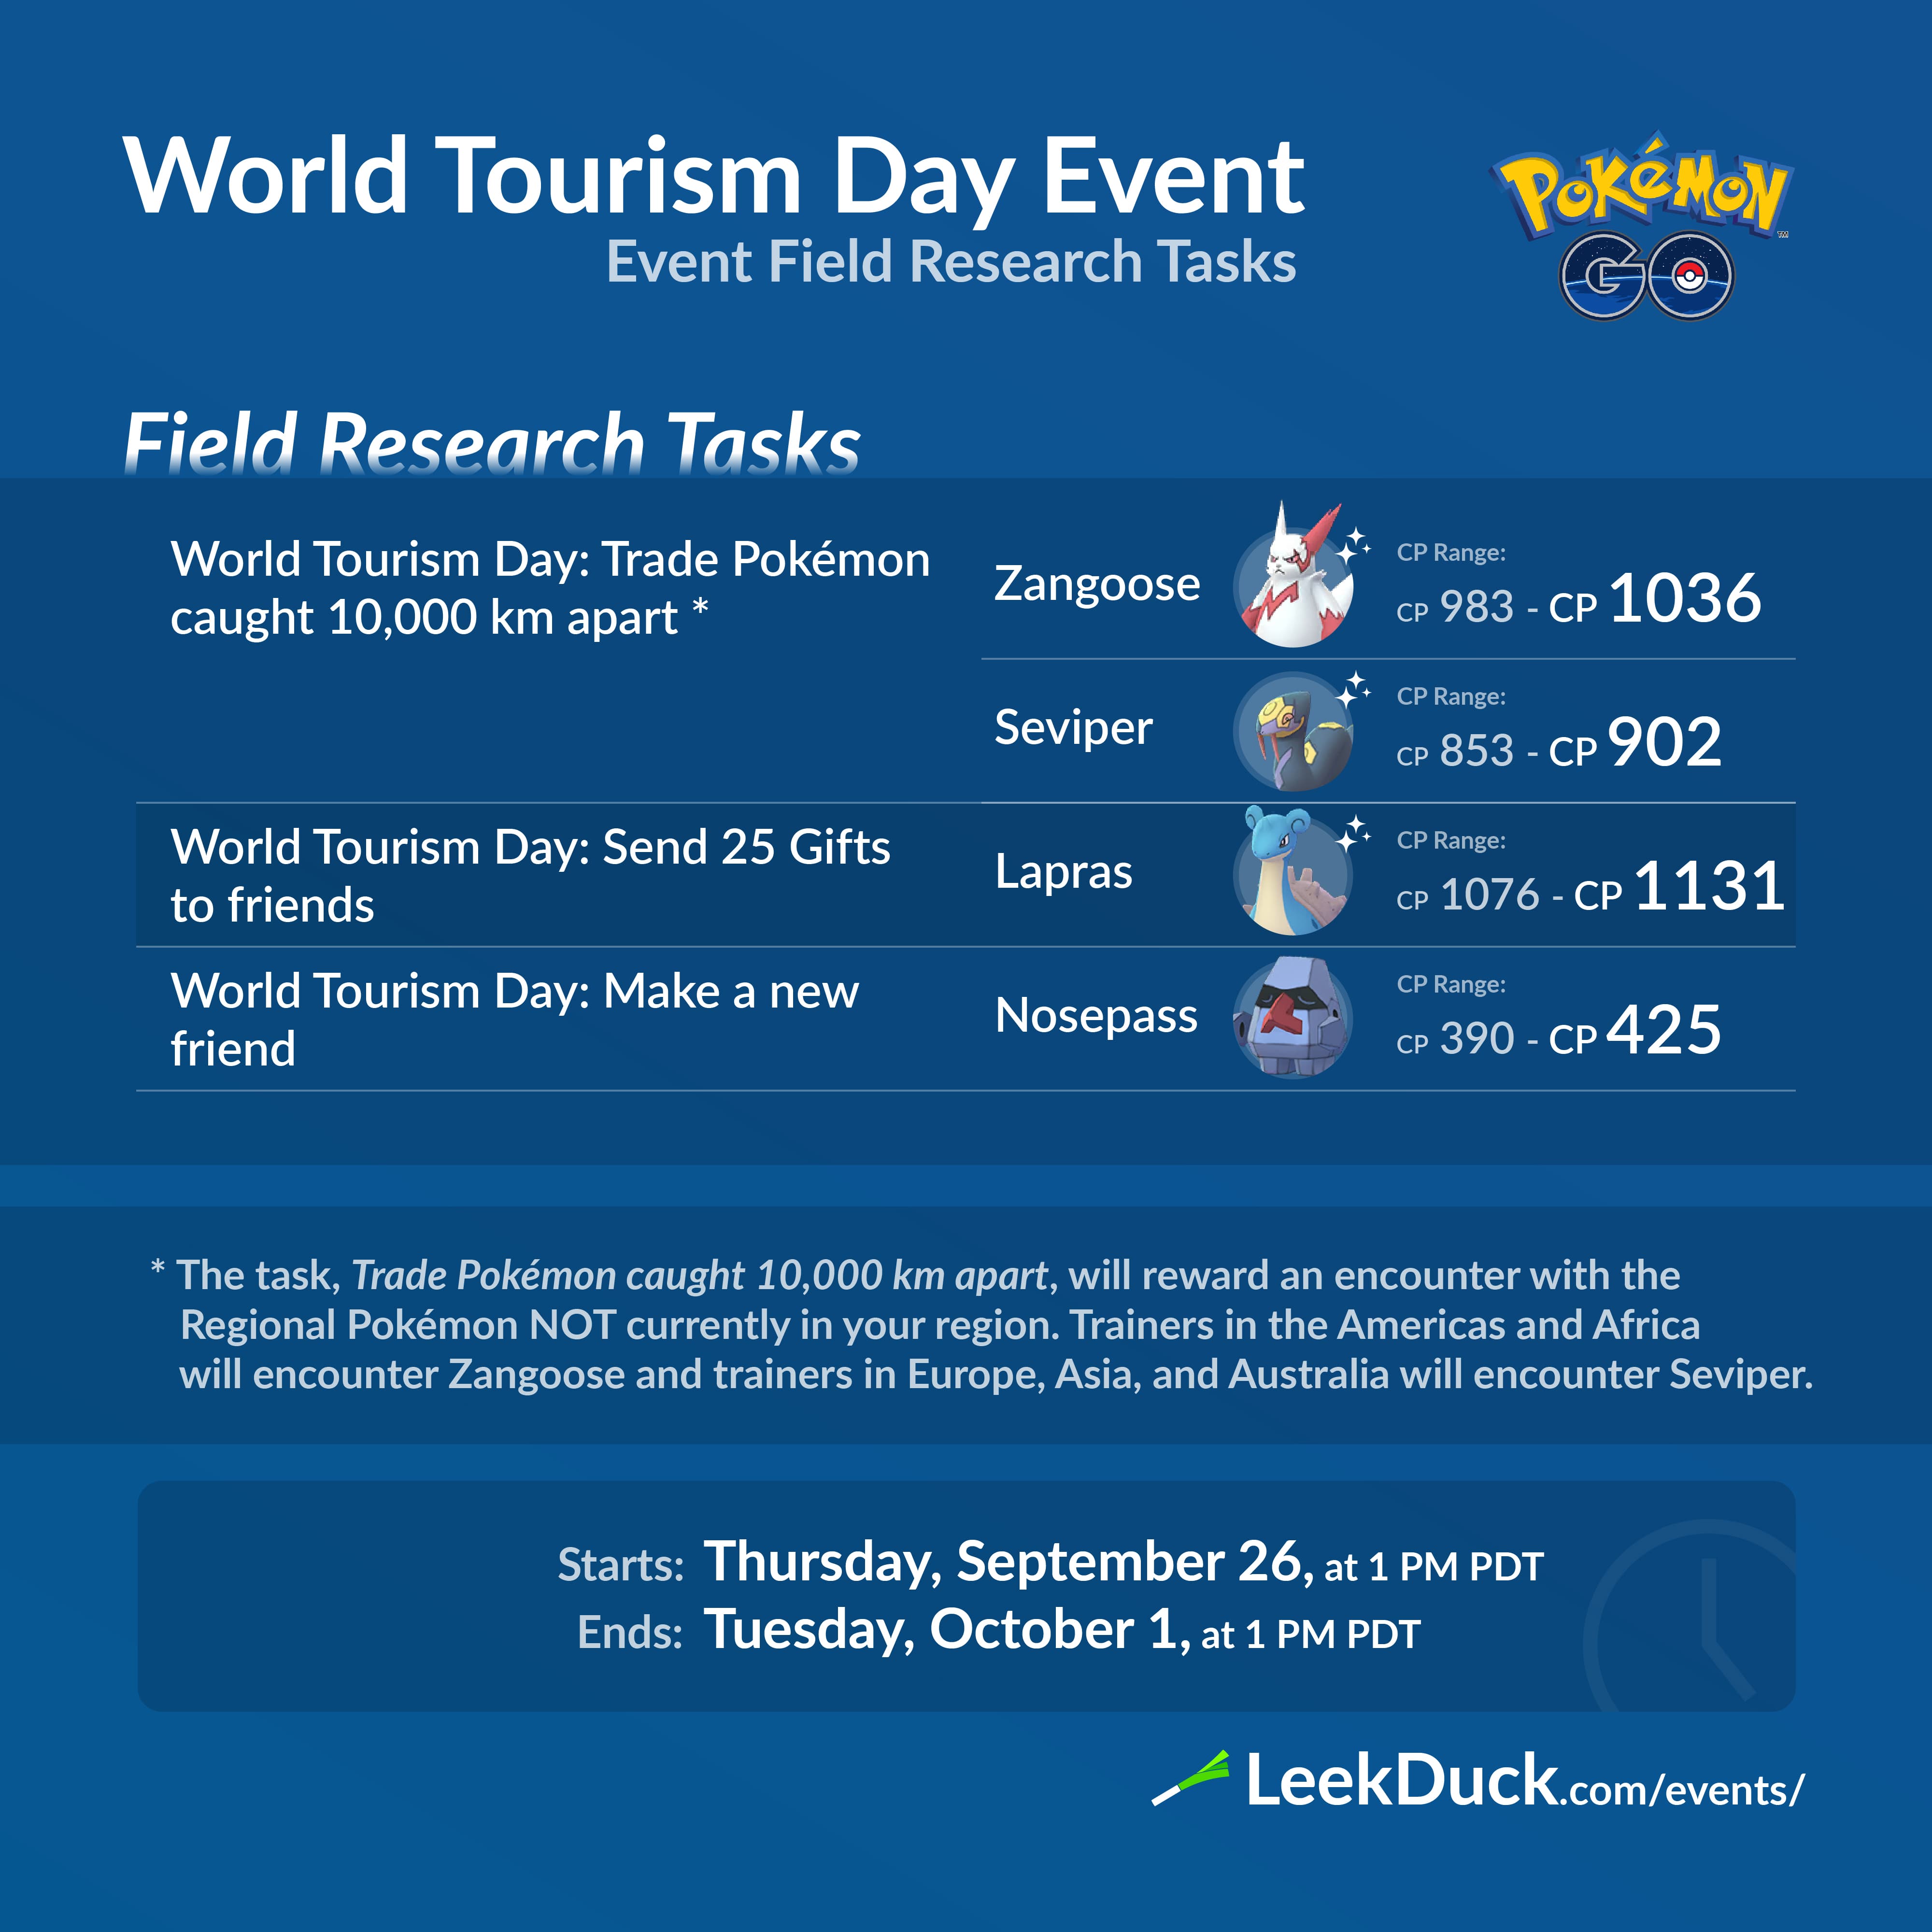 World Tourism Day Event Leek Duck Pokemon Go News And Resources